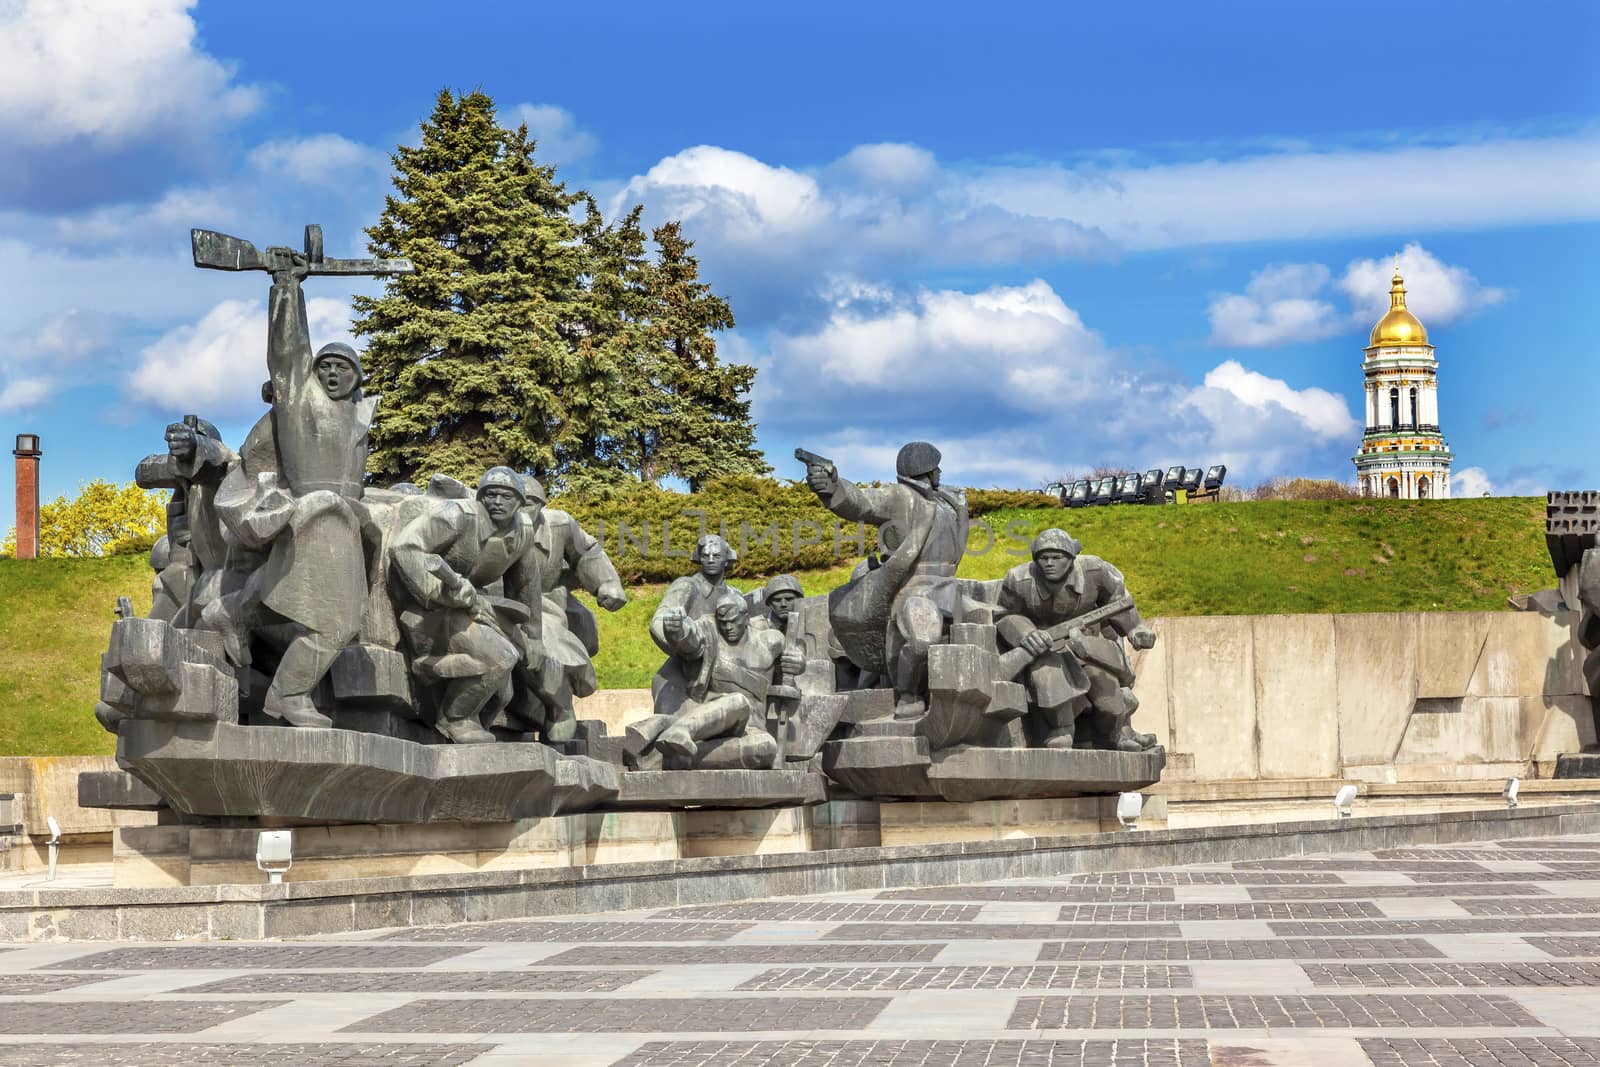 Soviet Soldiers Attacking World War 2 Crossing Dniper Monument Great Tower Lavra Great Patriotic War Museum Kiev Ukraine.  Museum founded by Soviet Union 1981